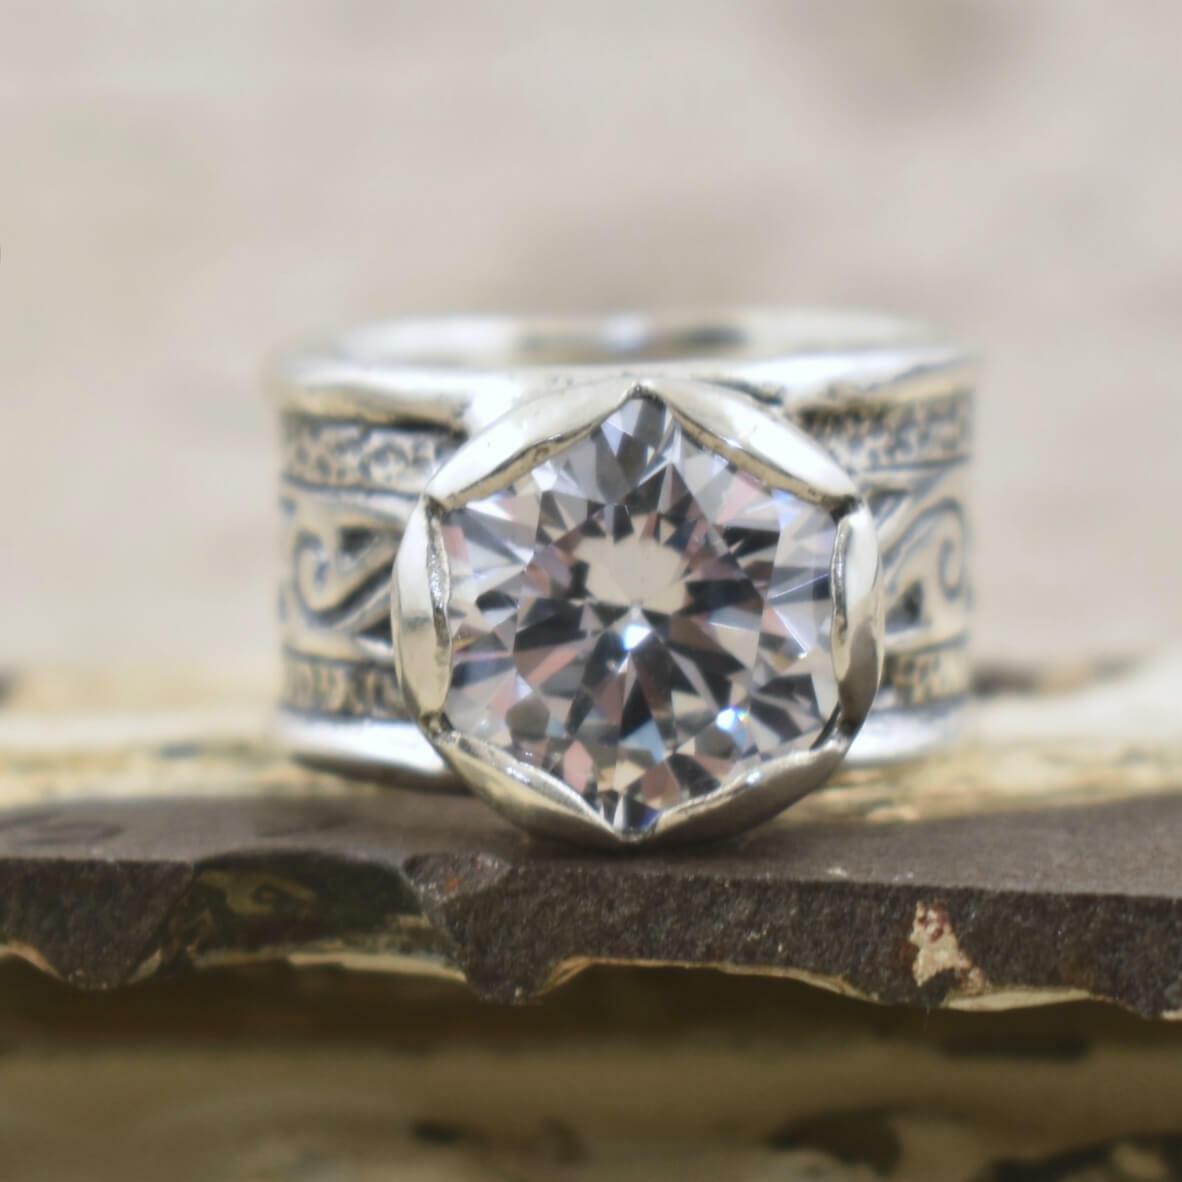 Chunky sterling silver ring with large cz